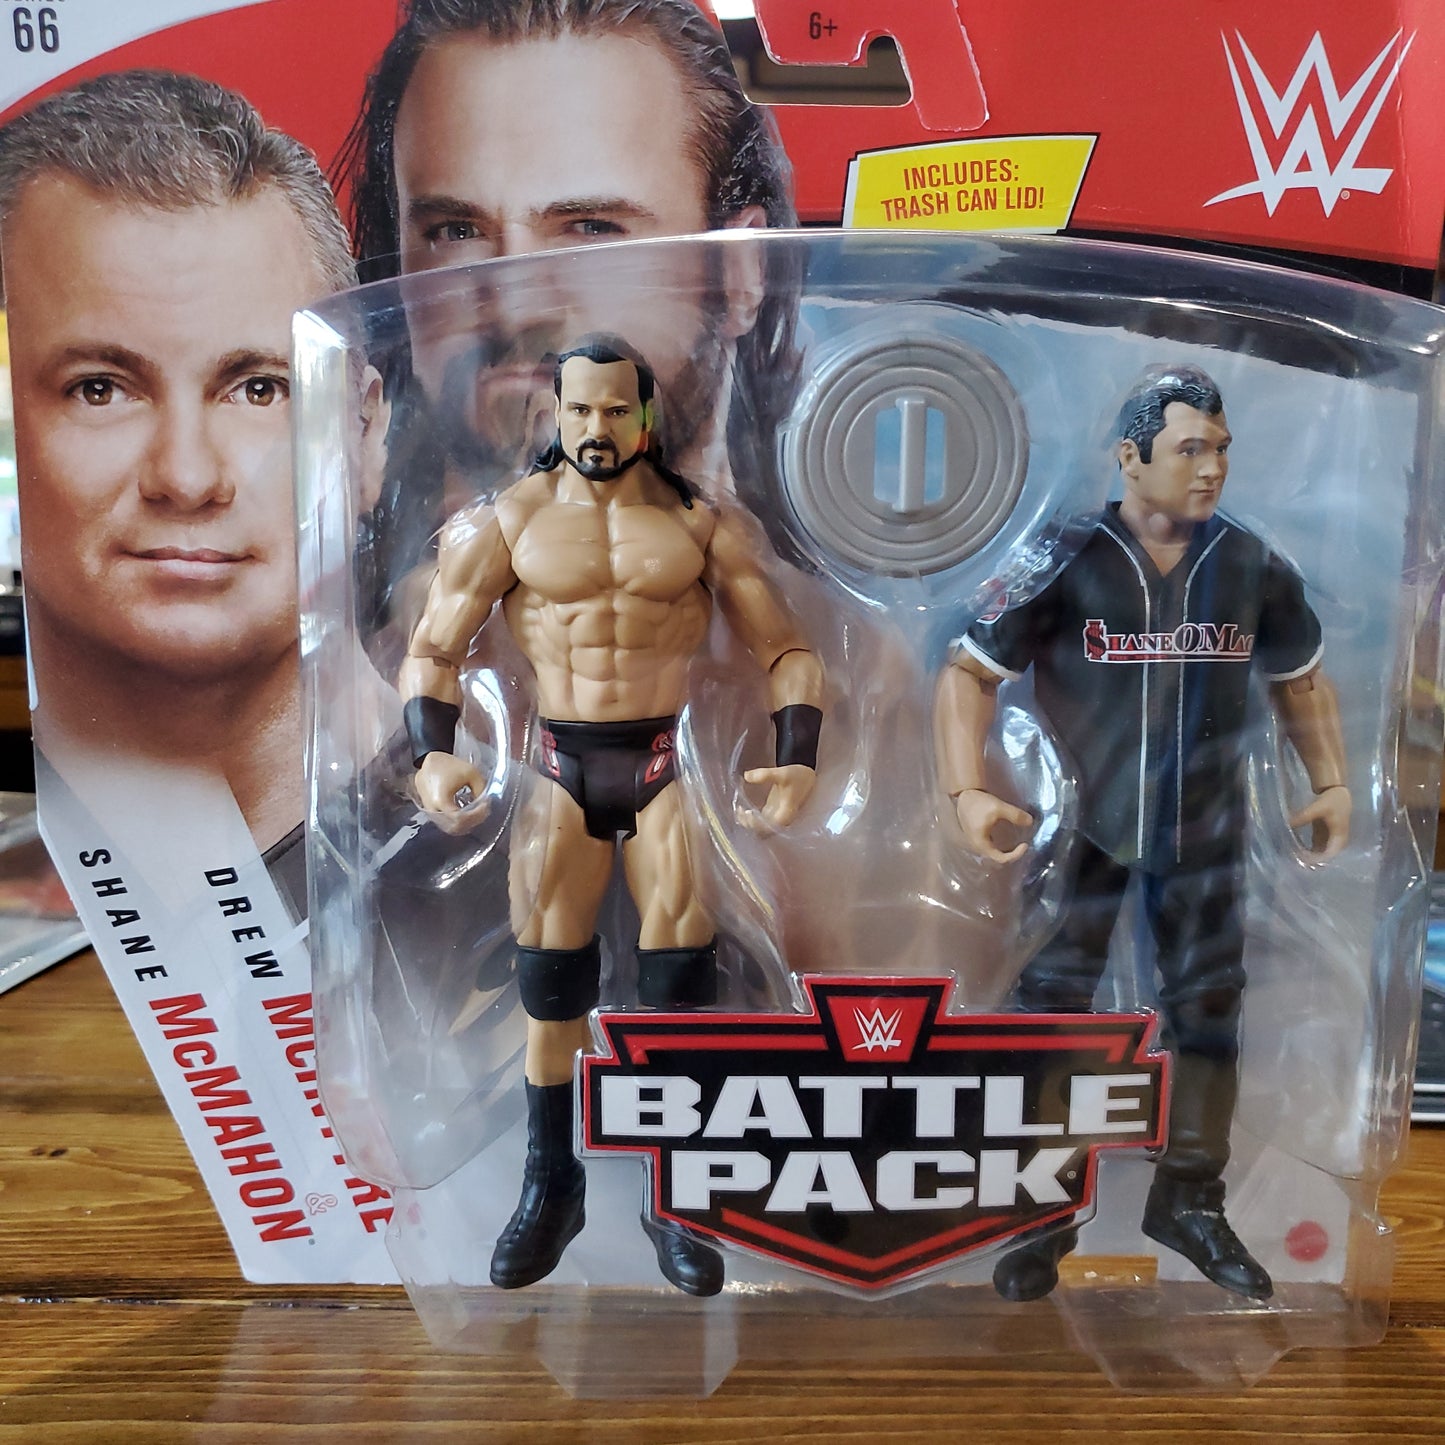 WWE - Battle Pack - Shane McMahon and Drew McIntyre